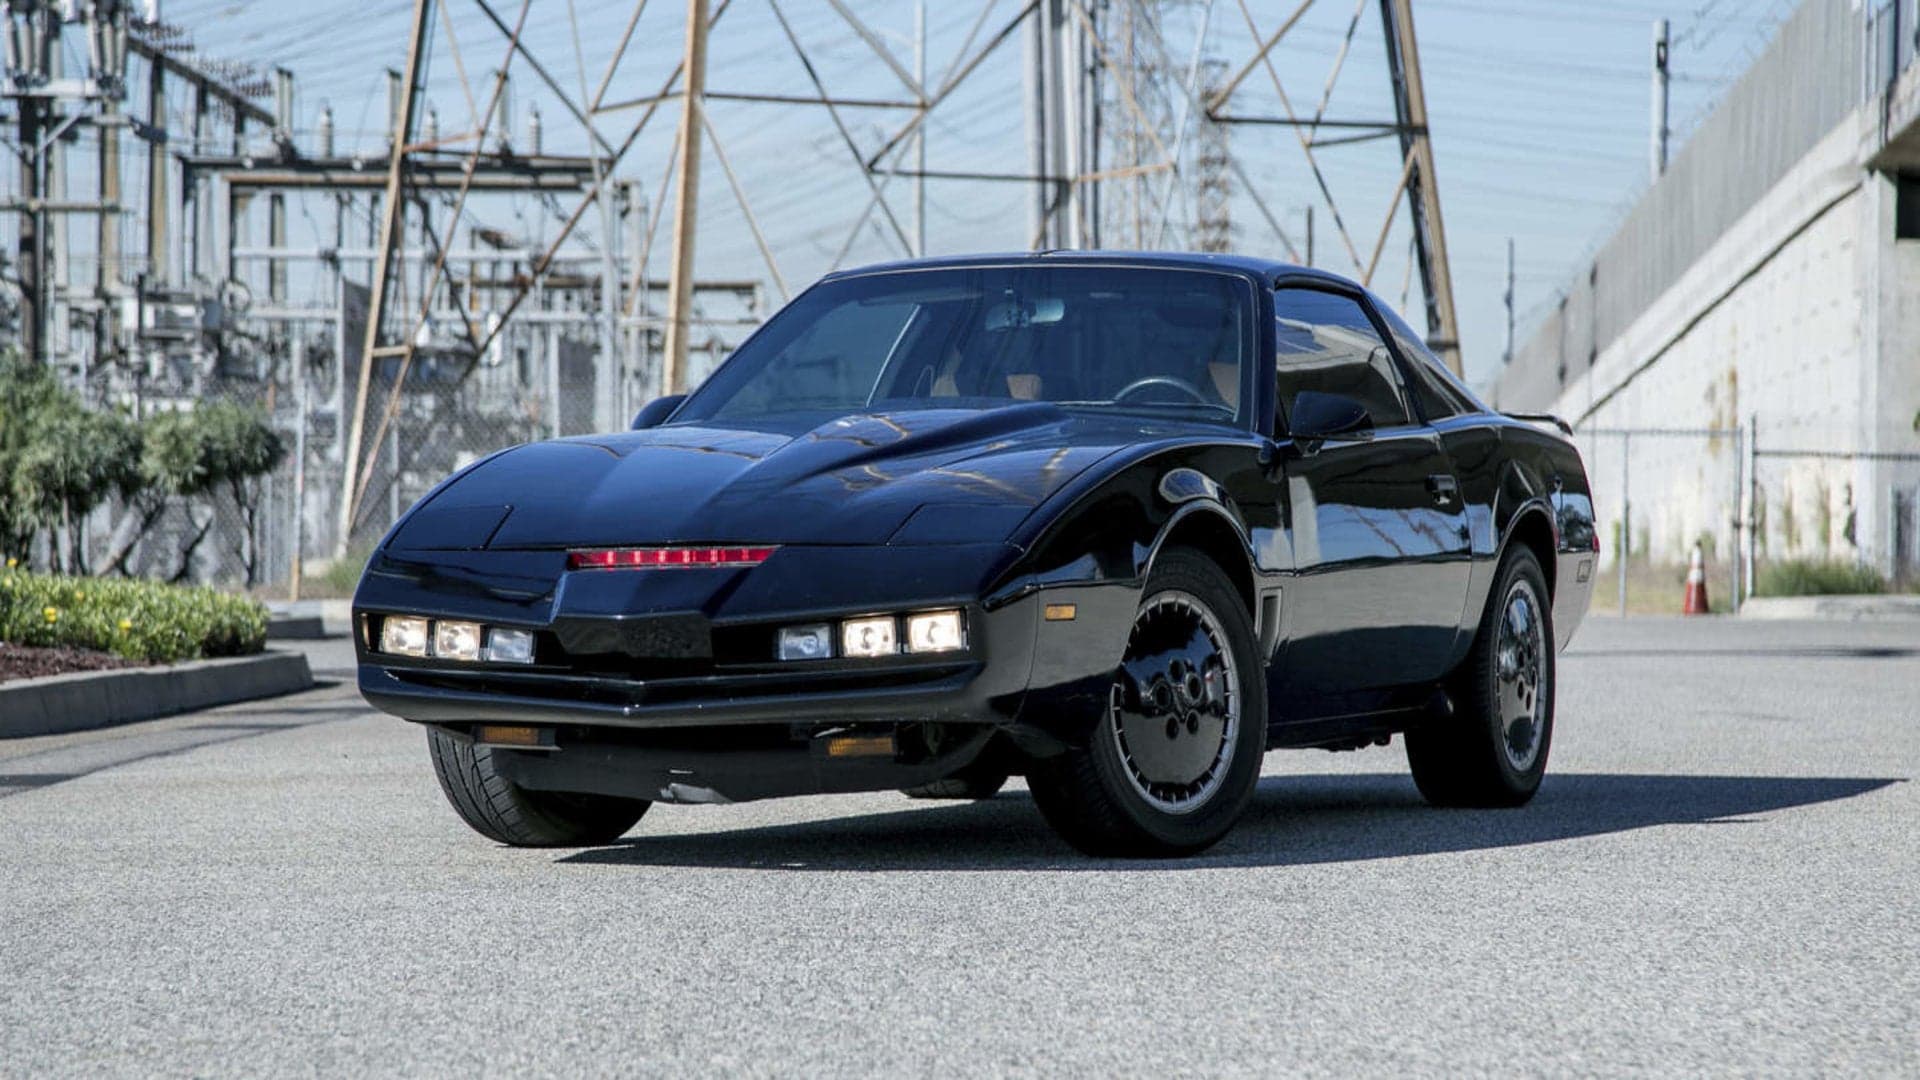 Live Out Your Knight Rider Dreams on Turo With This Near-Perfect K.I.T.T. Replica